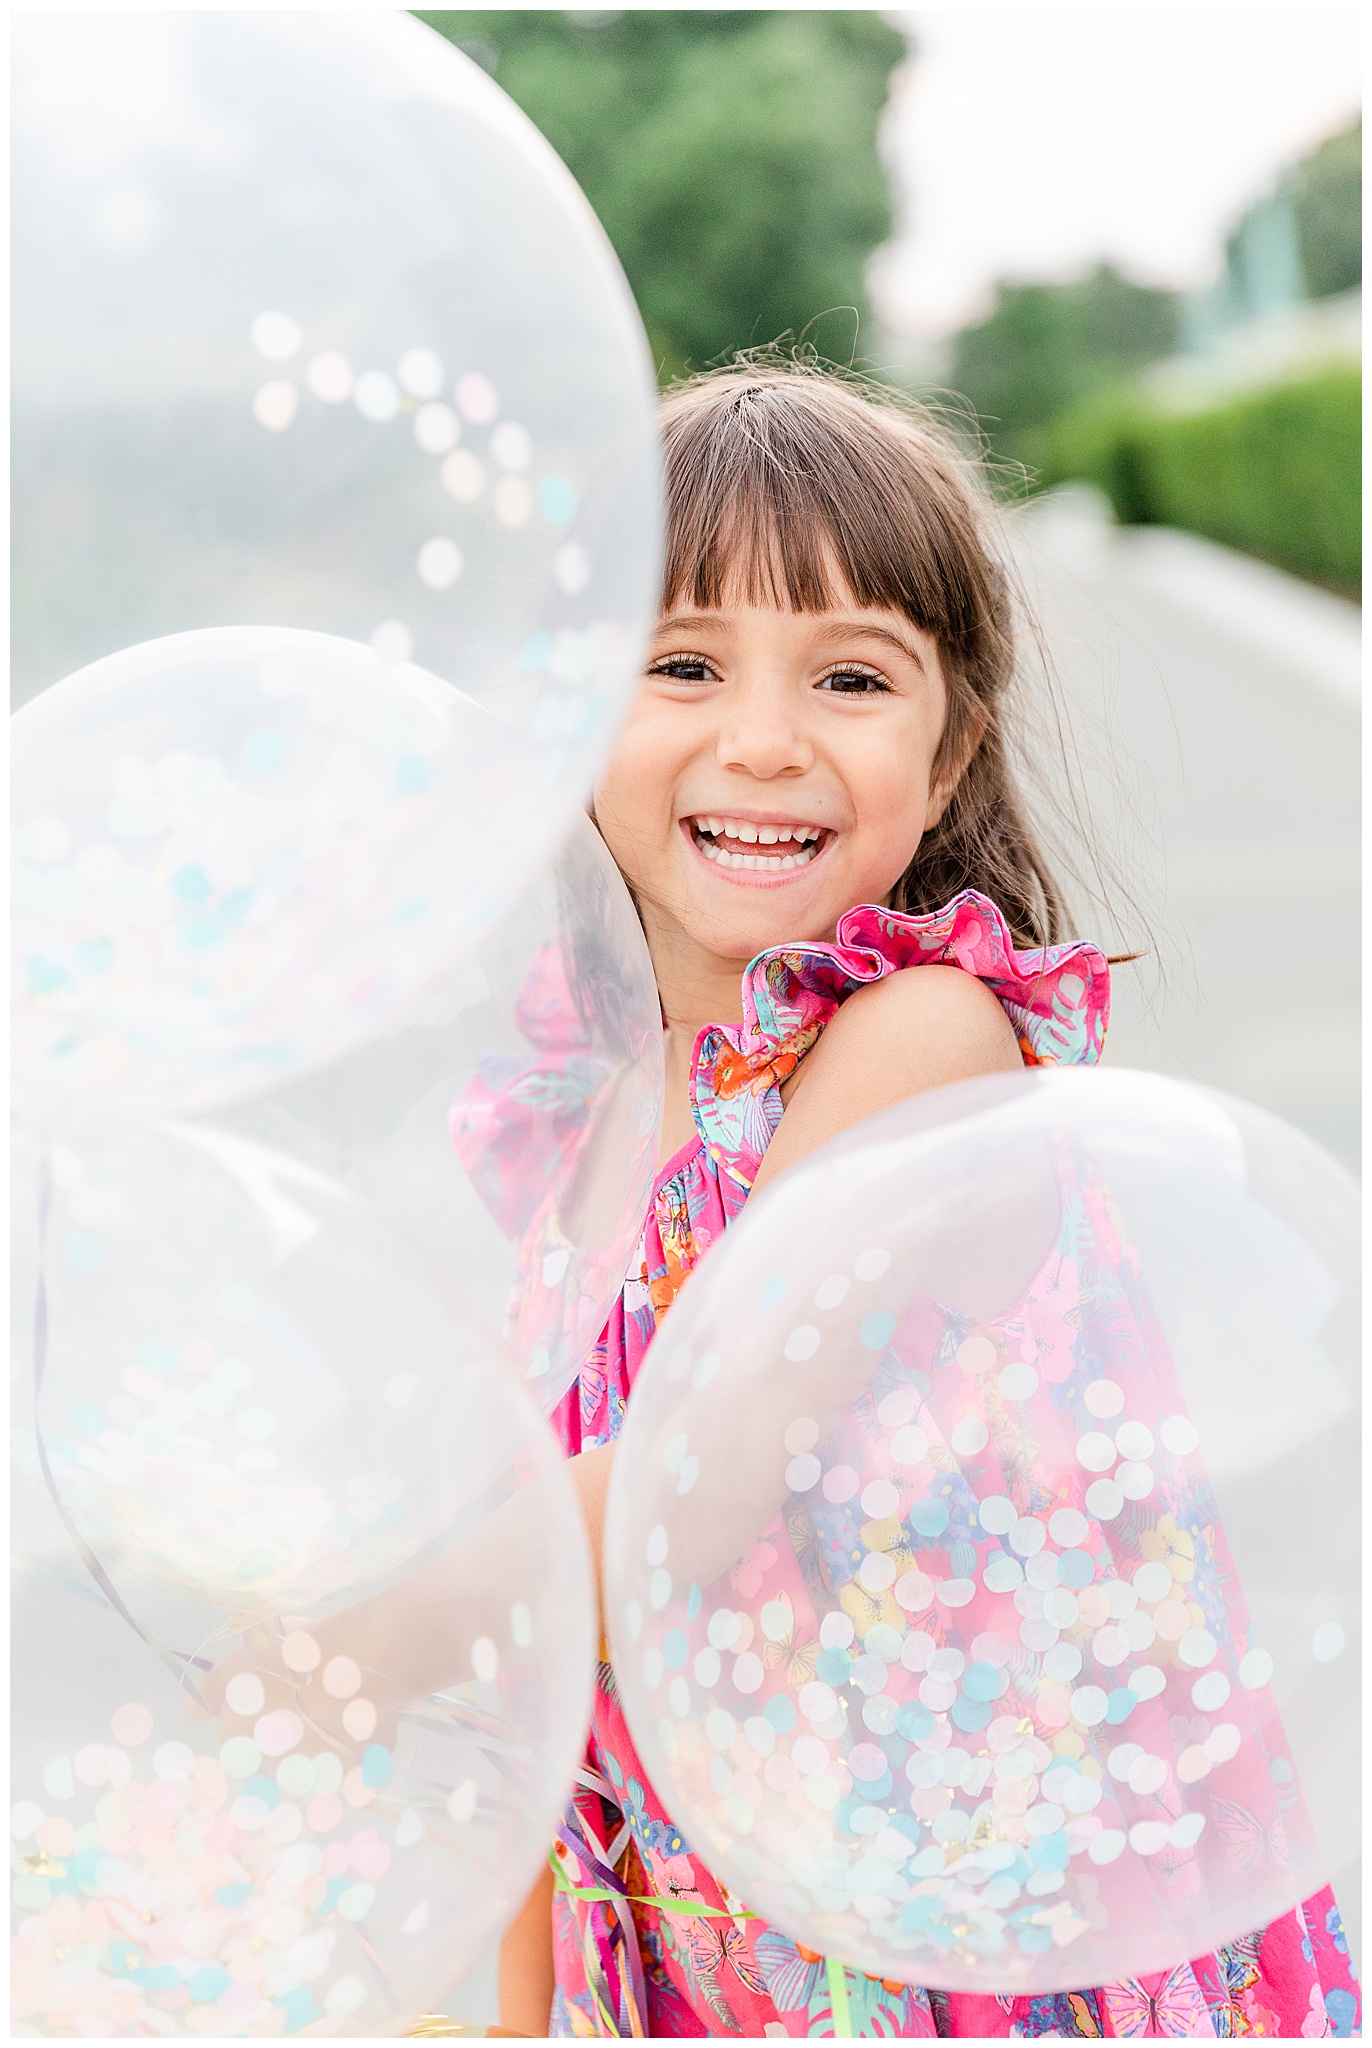 Balloons for Birthday Session with Photographers Bethany and John Kofmehl